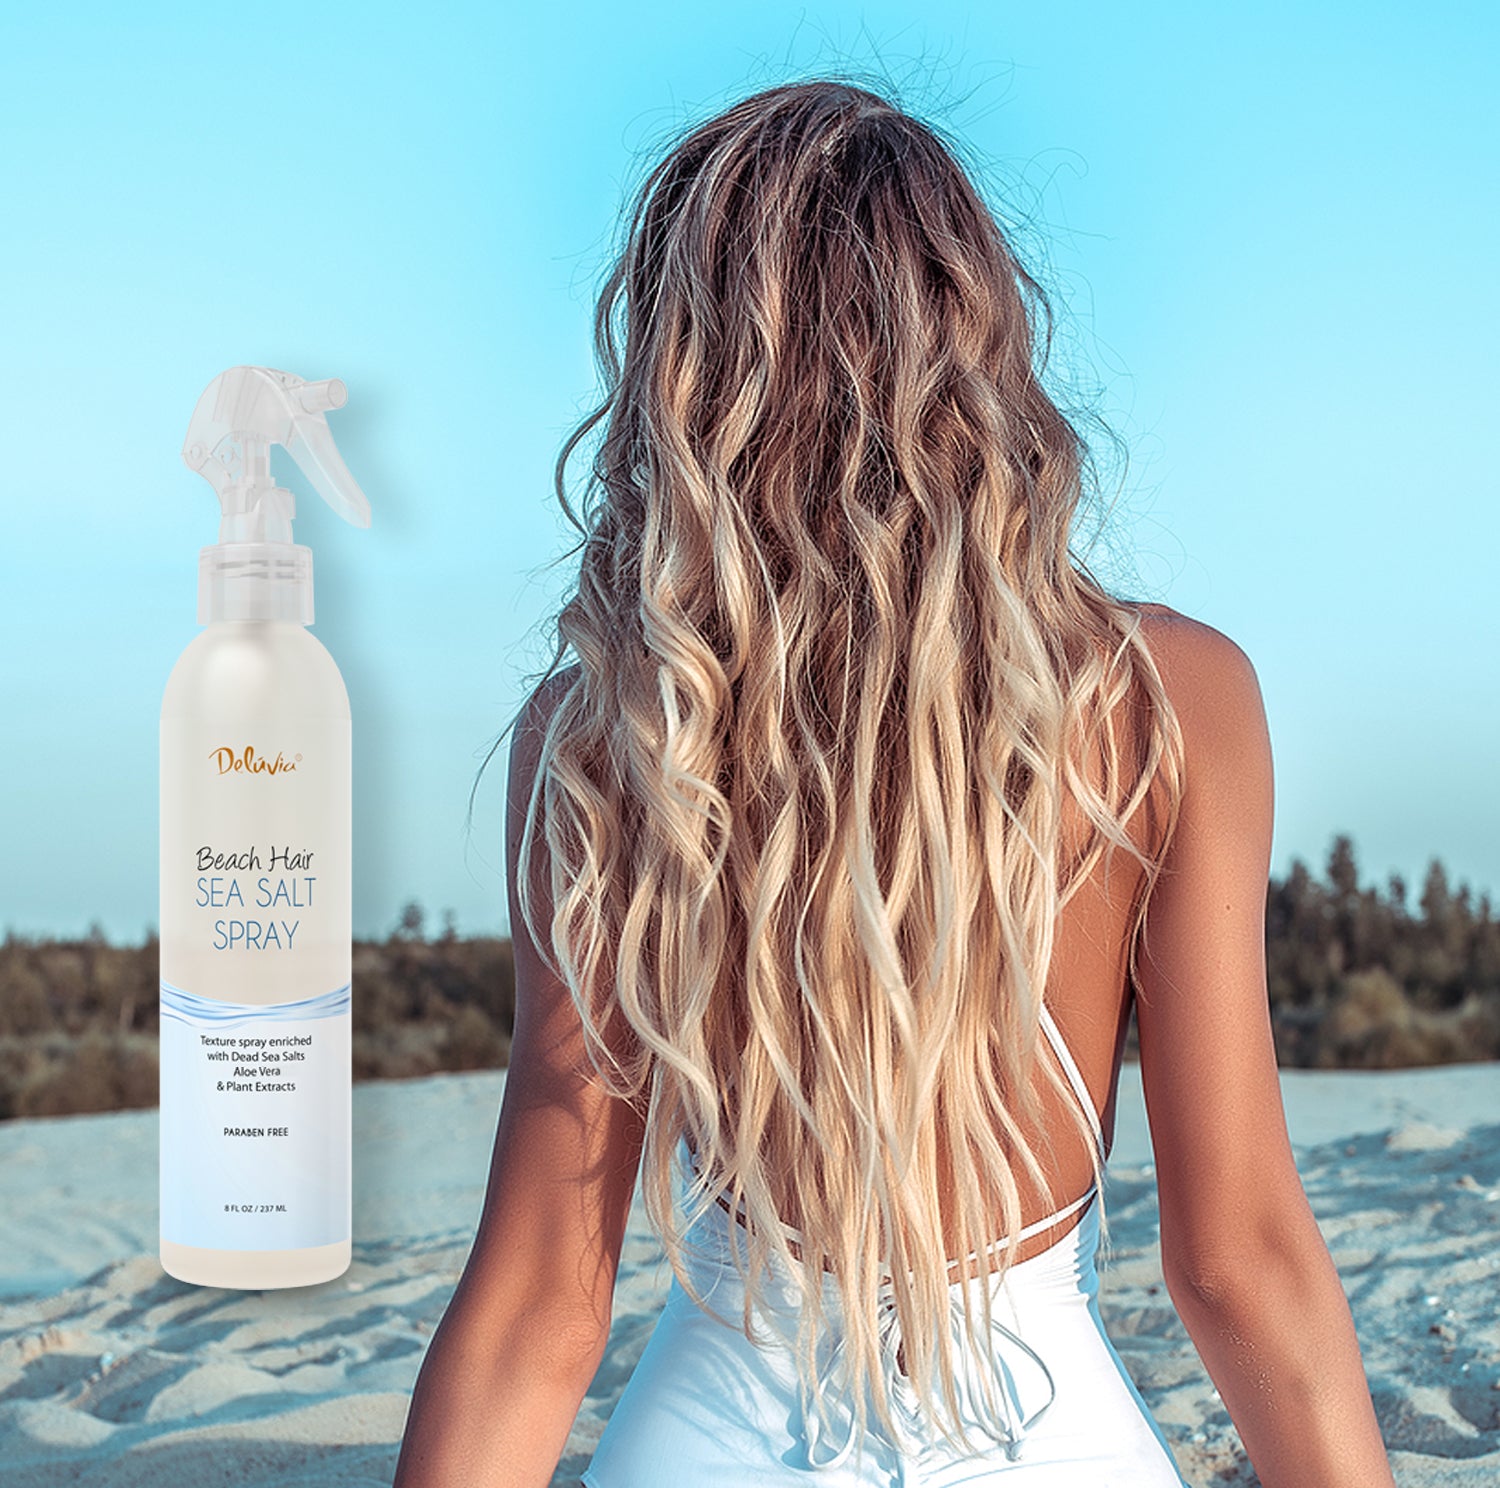 Photocomposition showing a young blonde woman facing a sand dune during the day, with an inclusion of a spray bottle of Deluvia's Beach Hair Sea Salt Spray